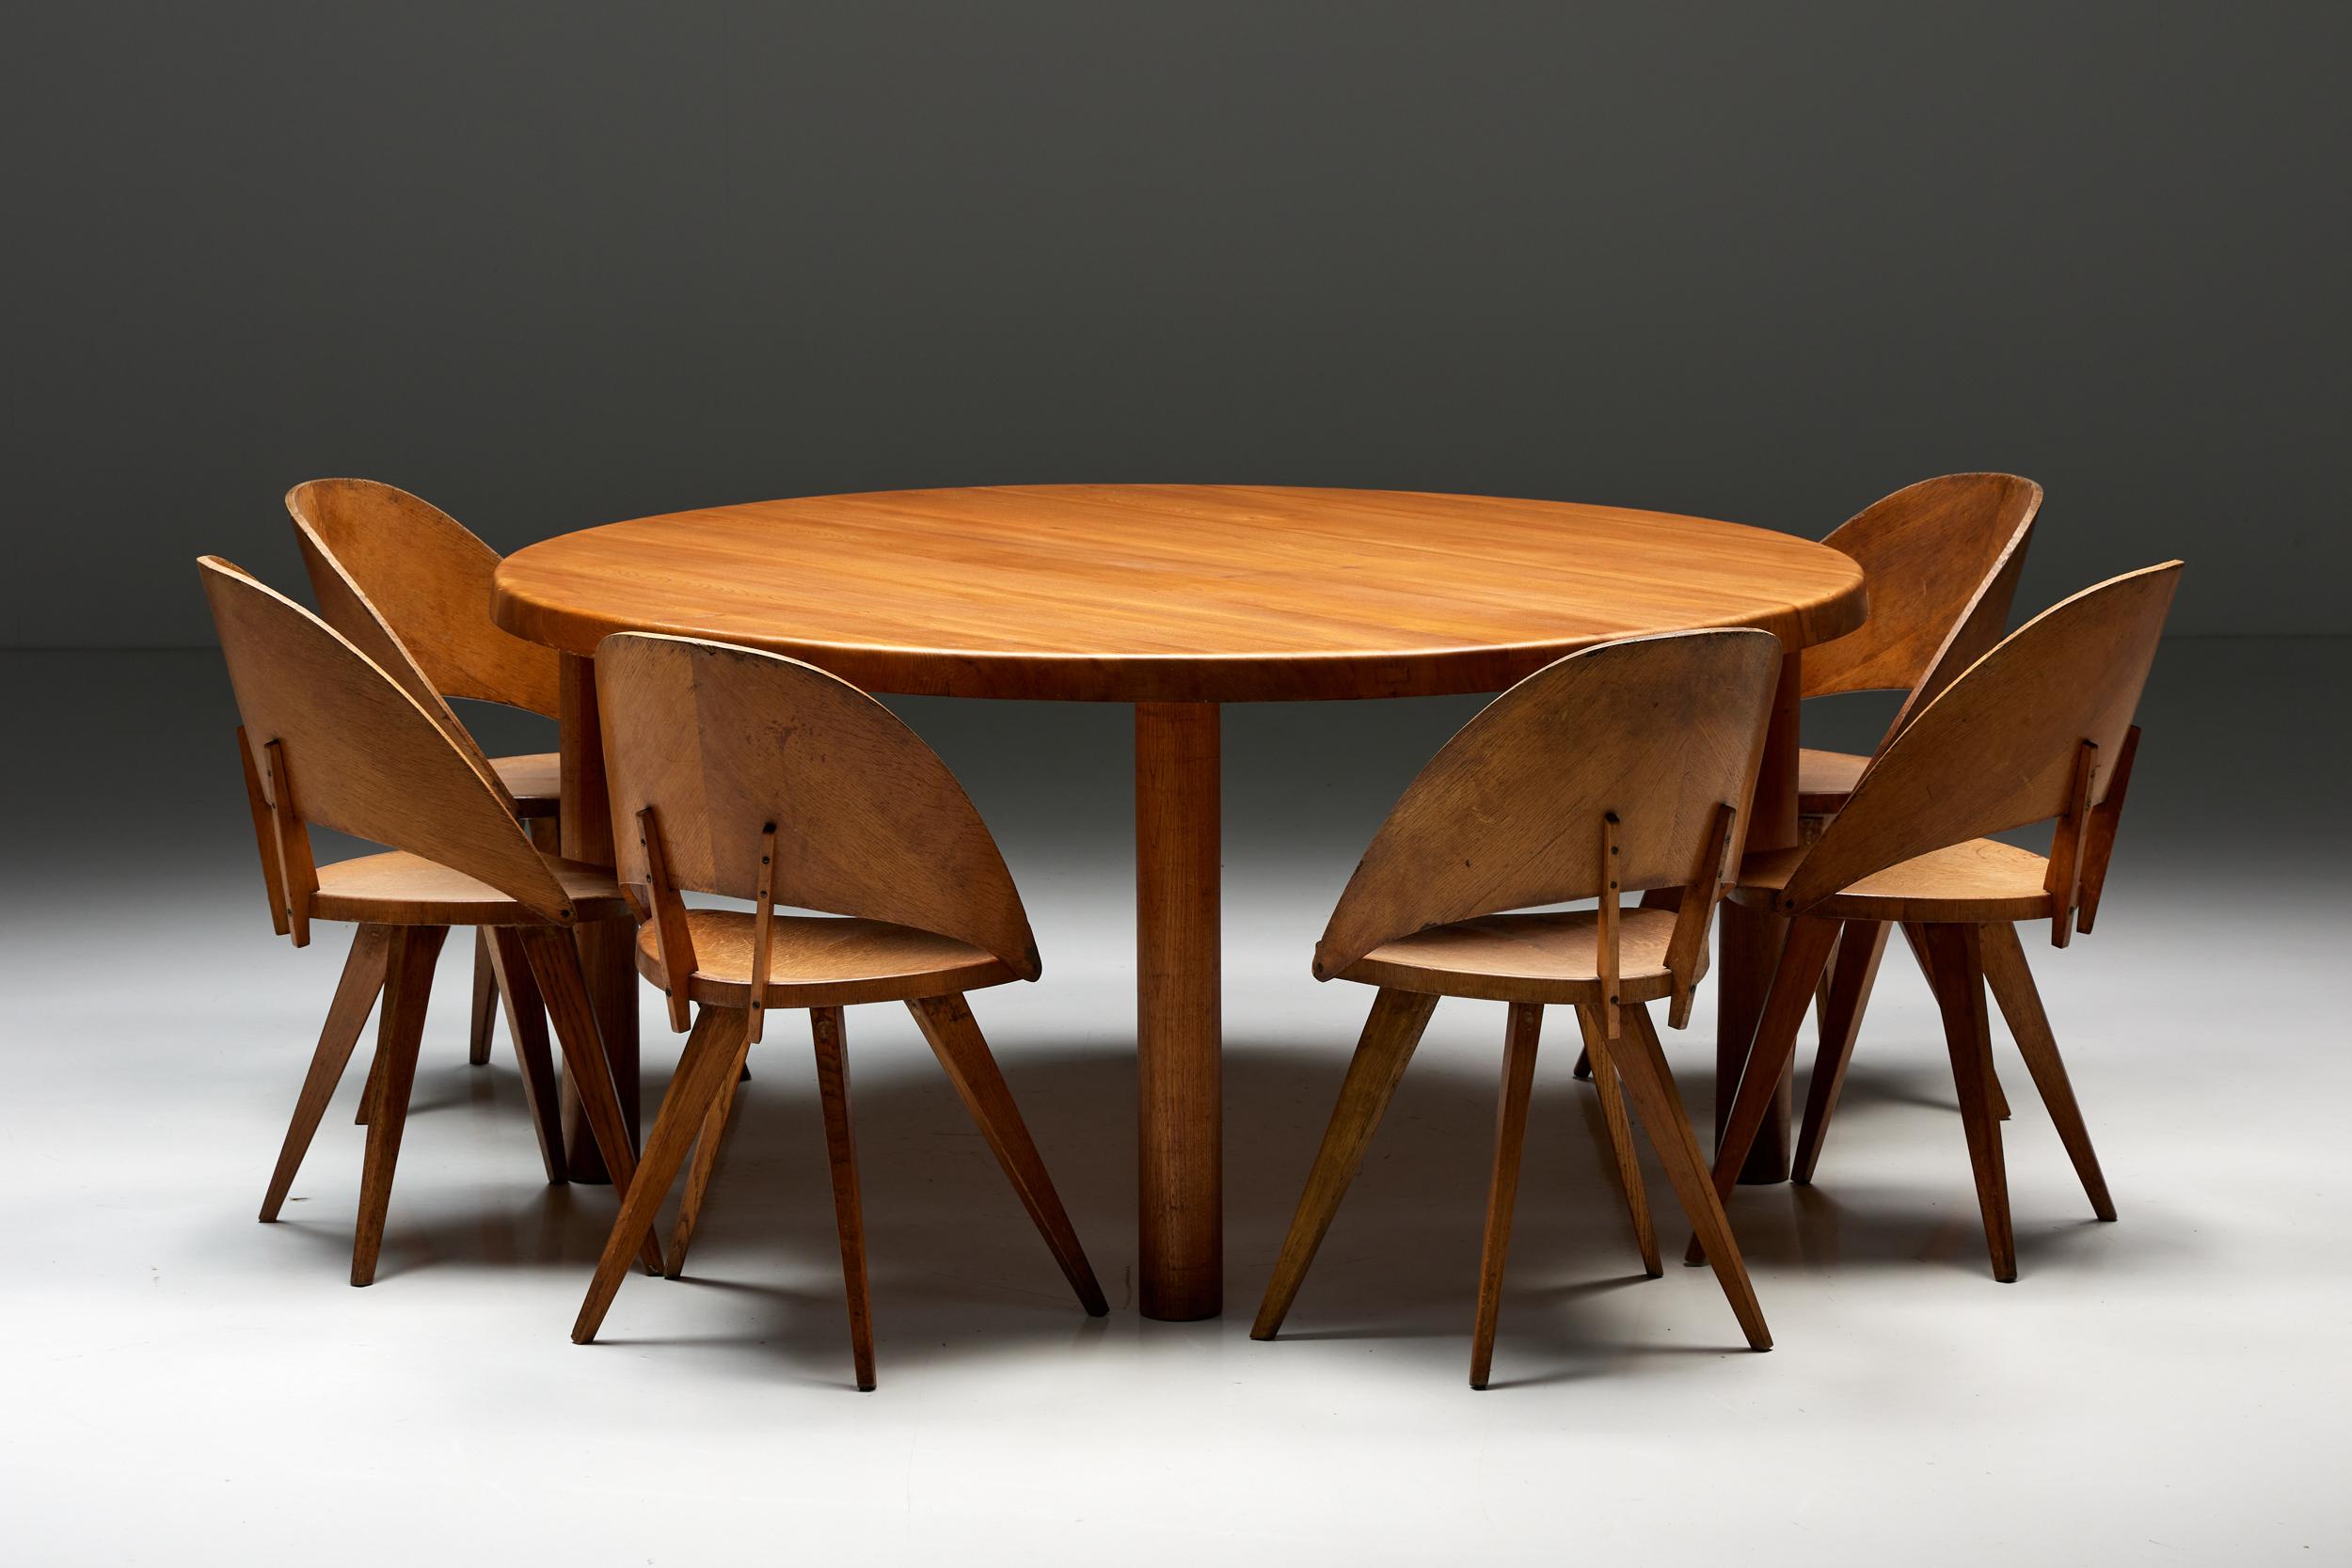 Pierre Chapo; Elmwood; Elm; France; Round Table; Brutalist; Woodworking; 1960s; Postmodern; Mid-Century Design; Rustic; Modernist;

Pierre Chapo early edition 'T02' dining table, a masterpiece of craftsmanship and style. Designed and manufactured